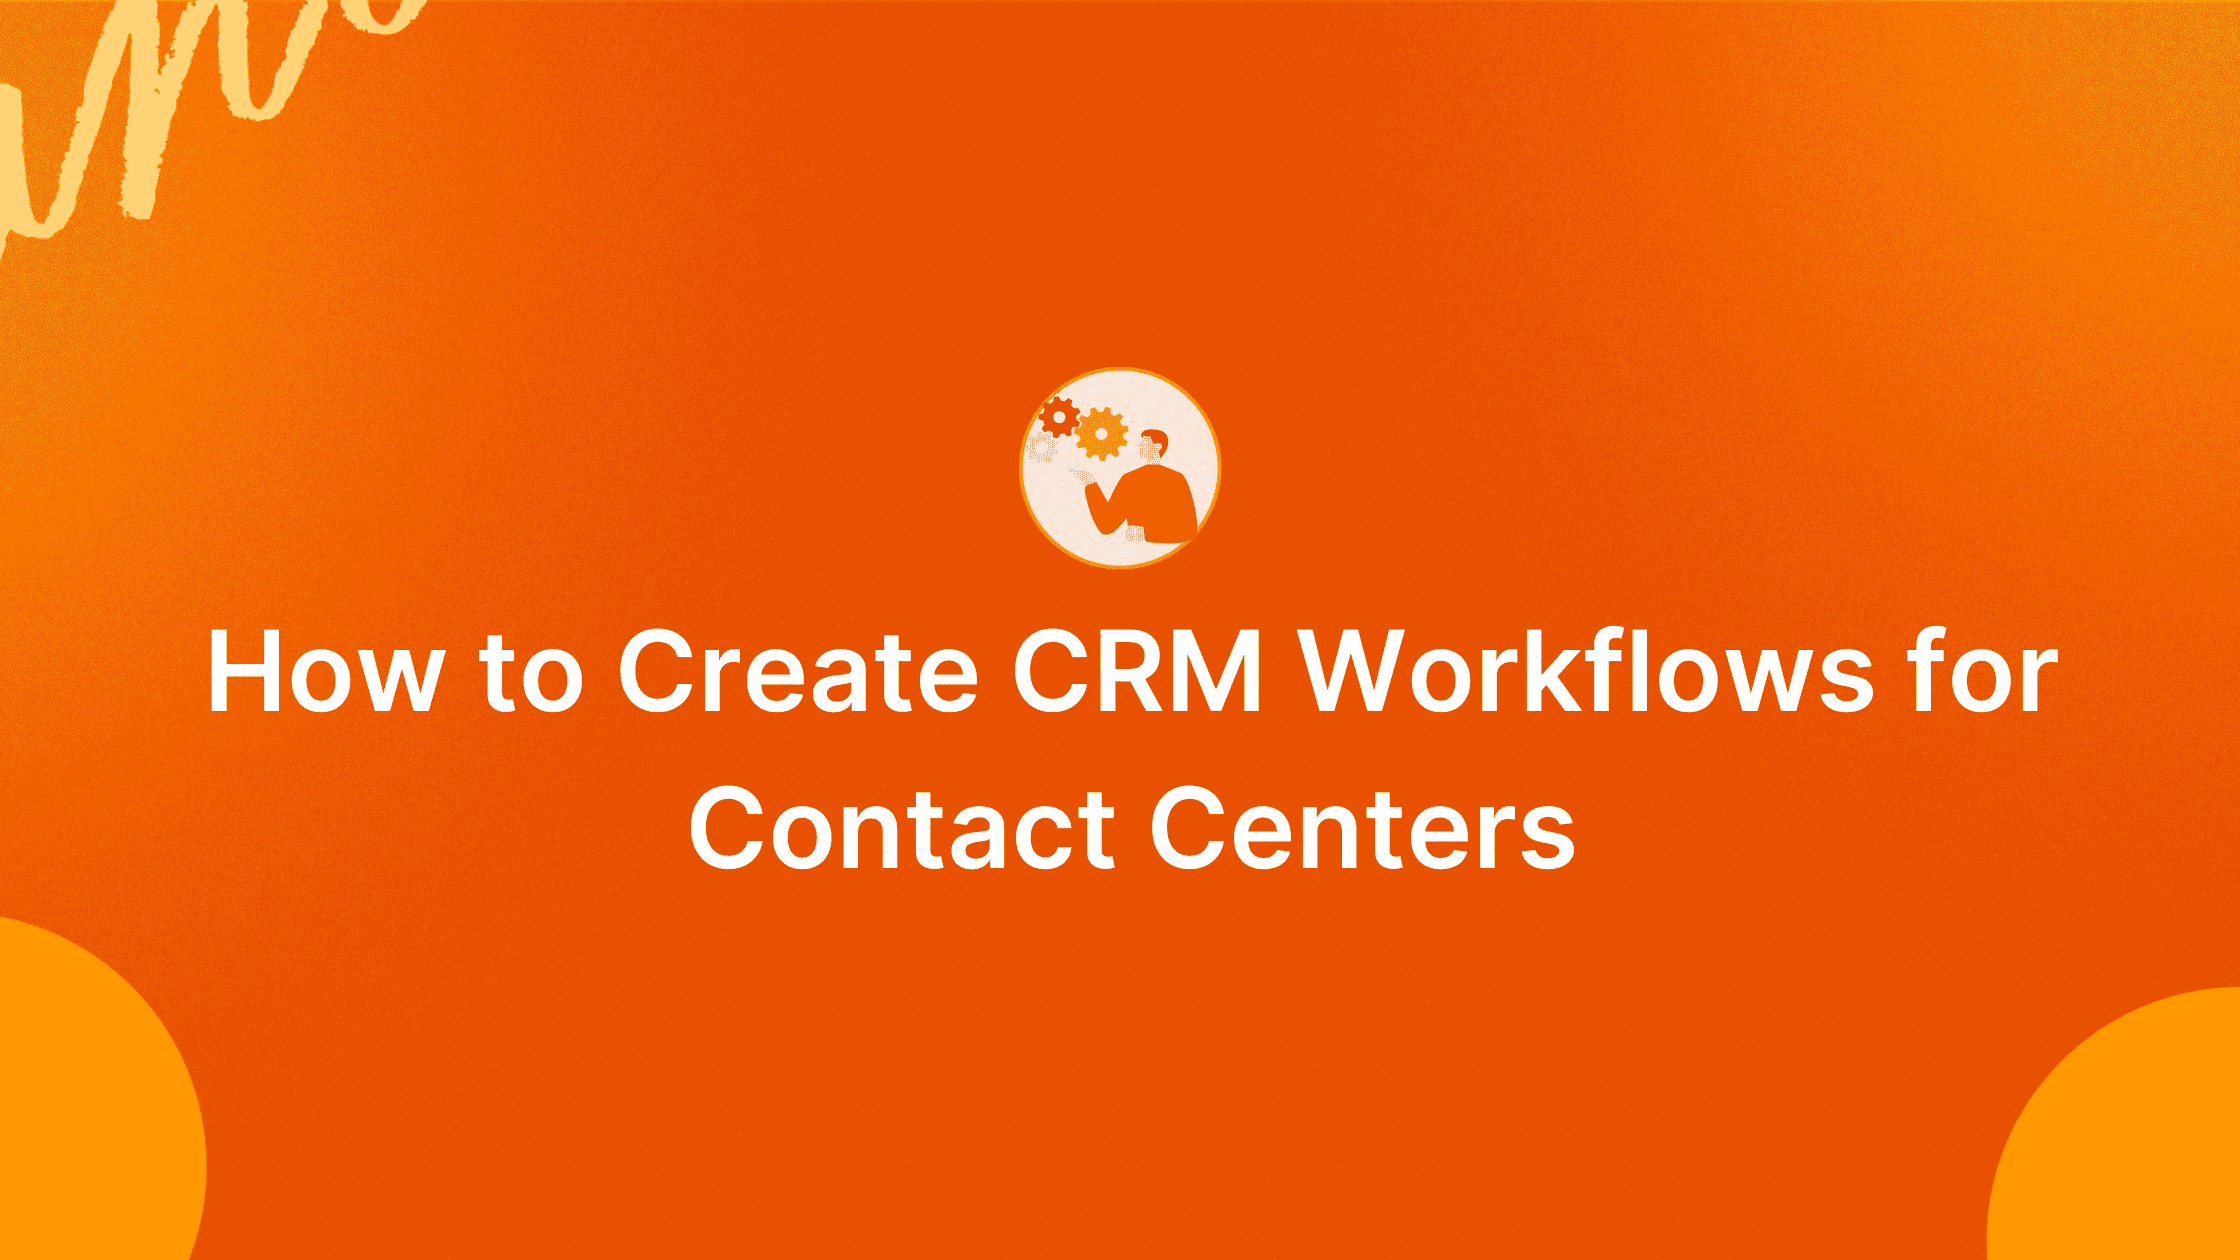 Create CRM Workflow for Contact Centers: Steps to Get Started